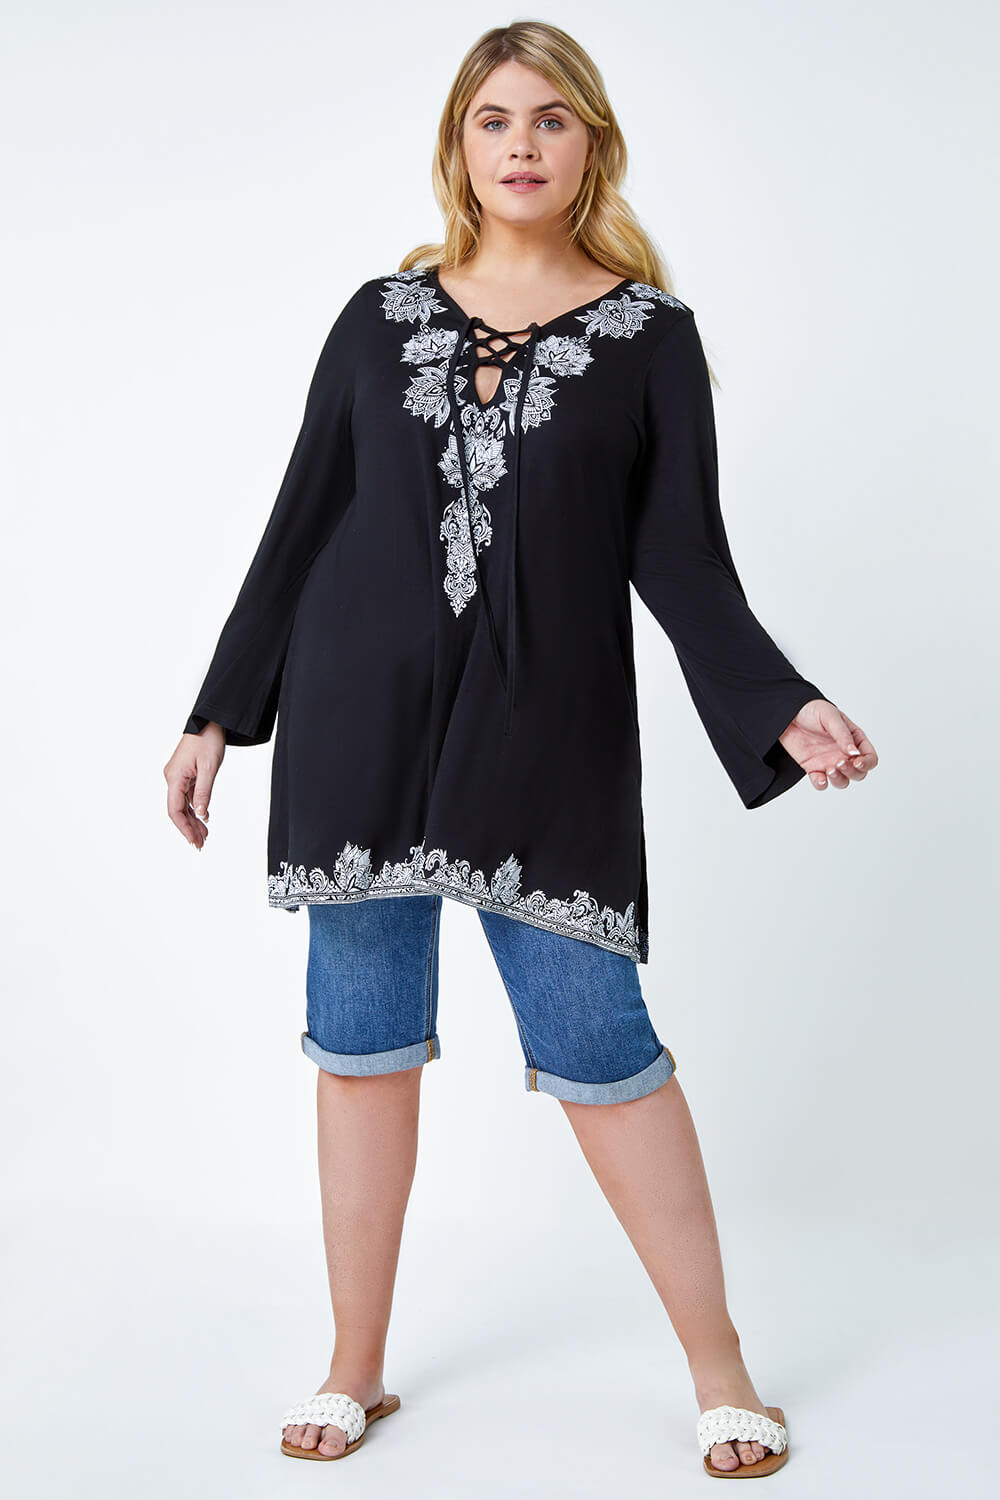 Black Curve Border Print Lace Up Top, Image 2 of 5